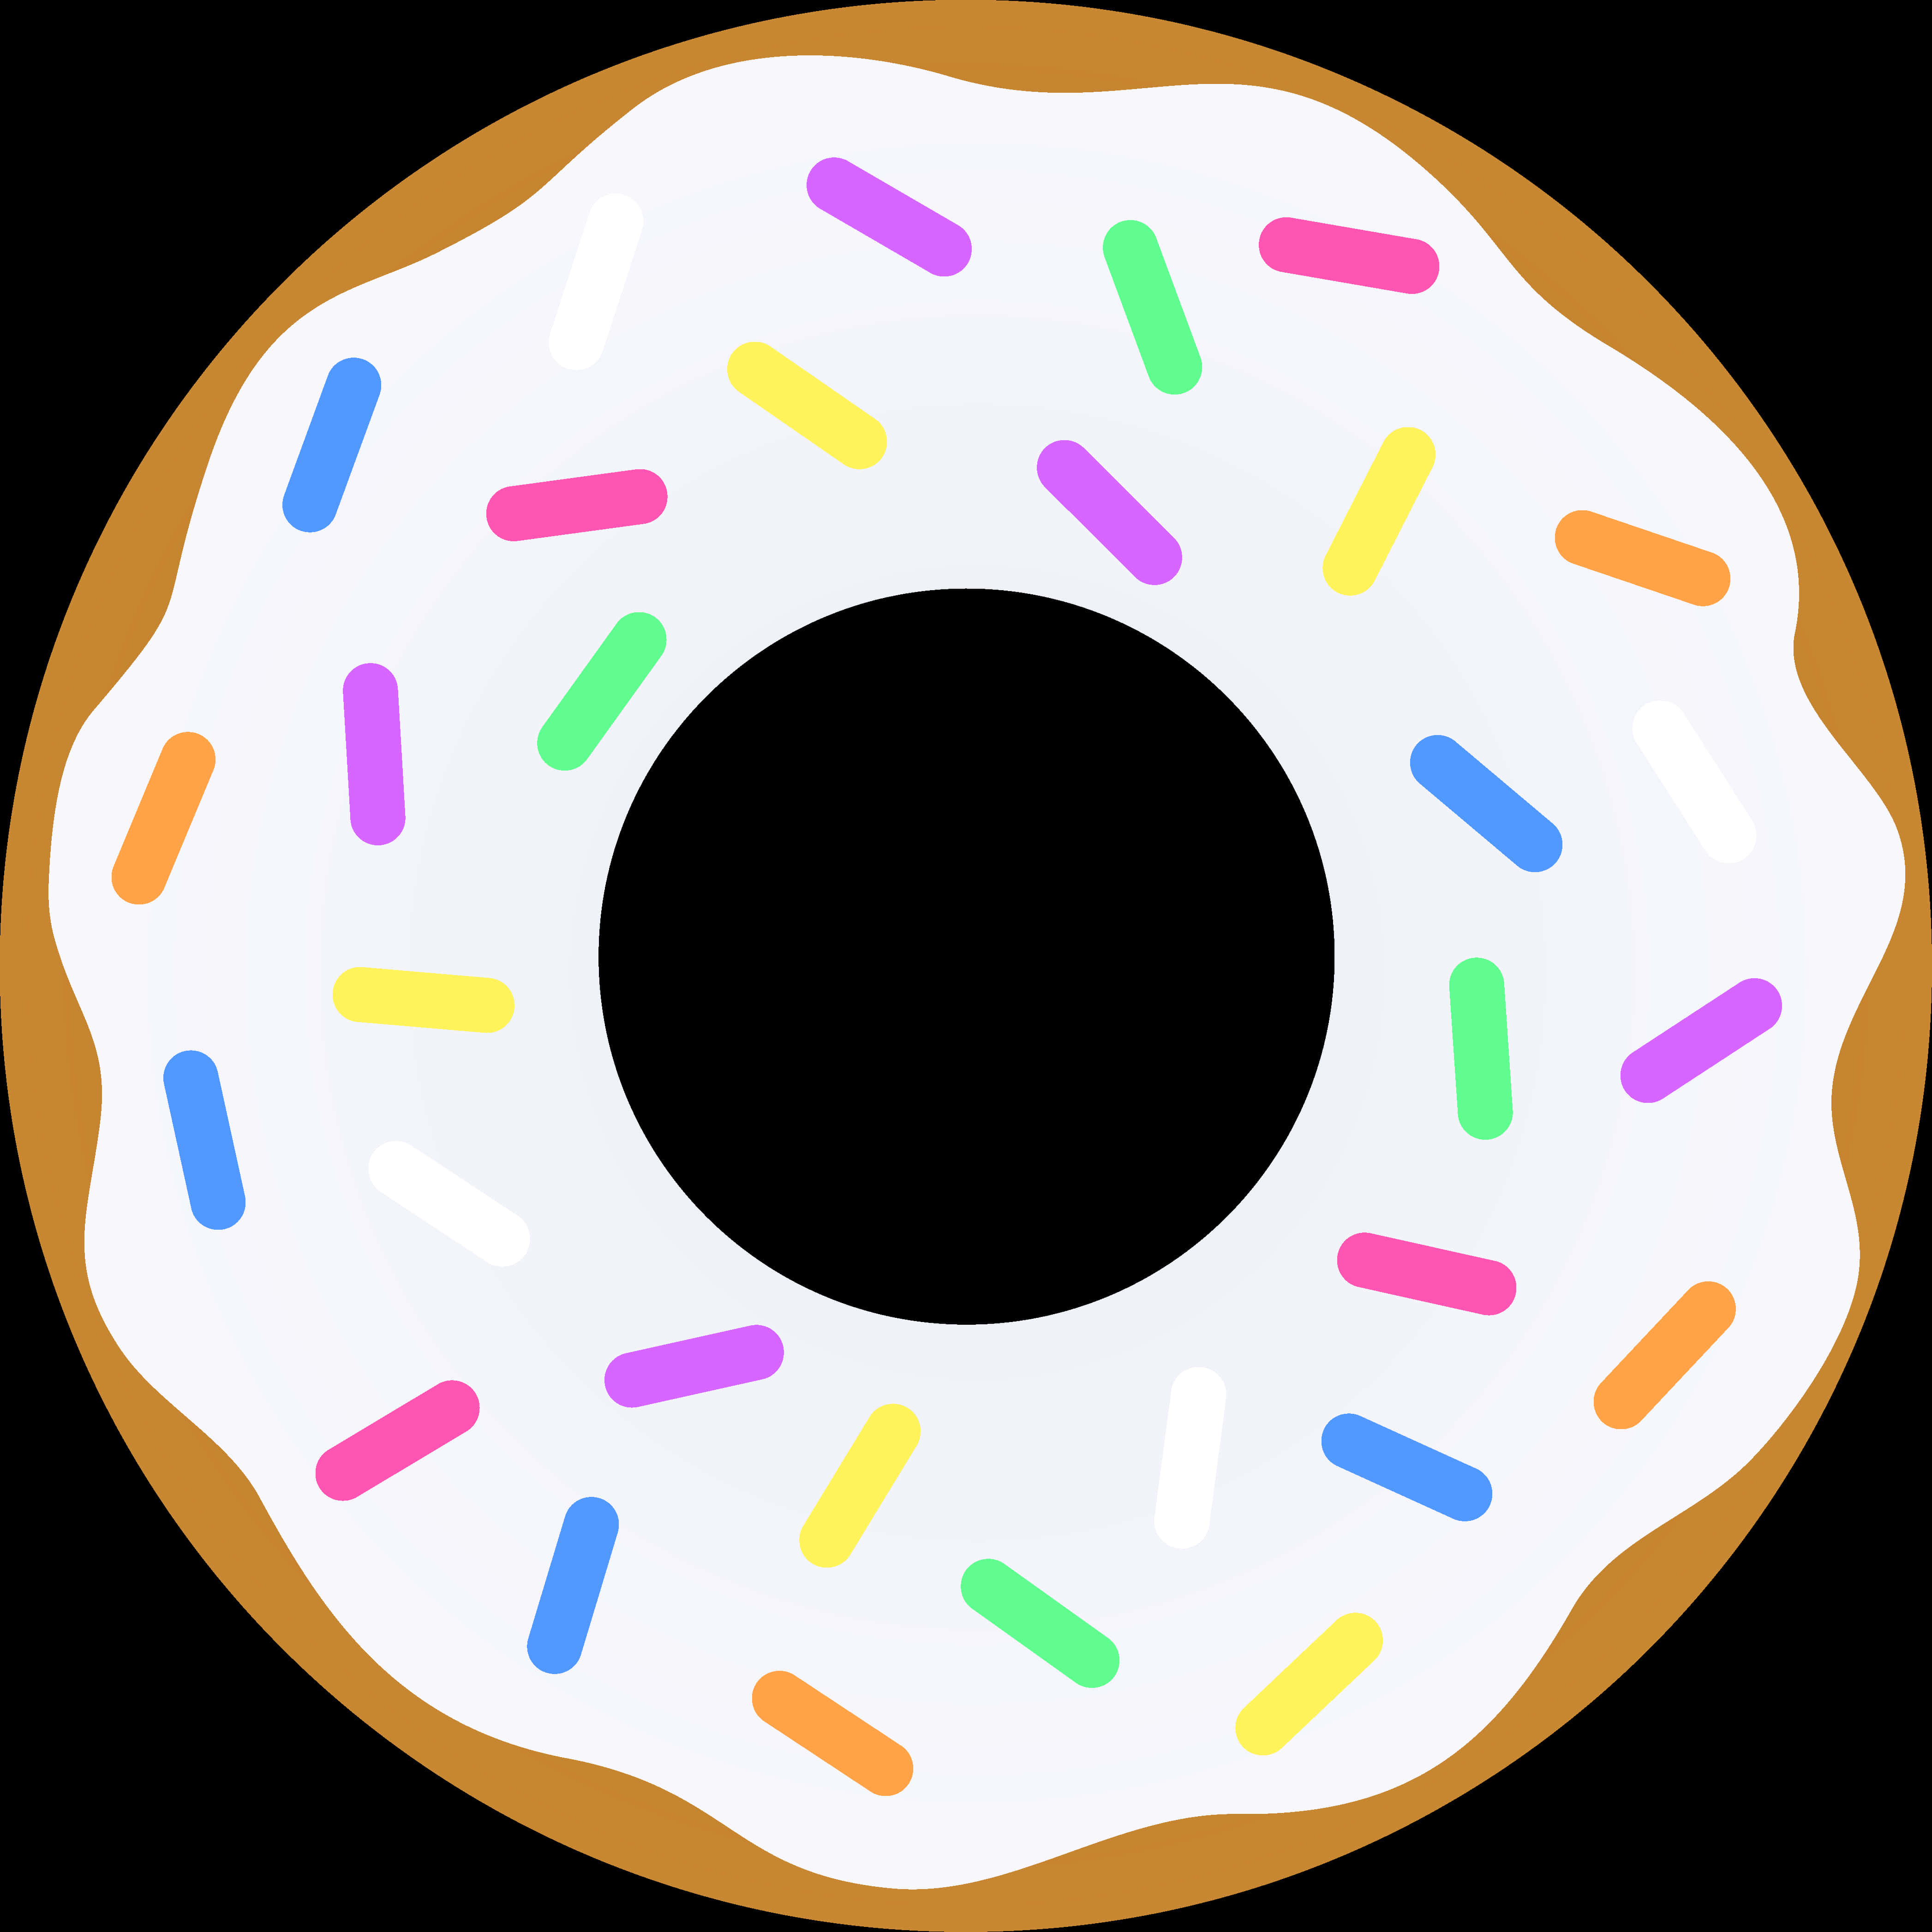 Colorful Sprinkled Donut Graphic PNG